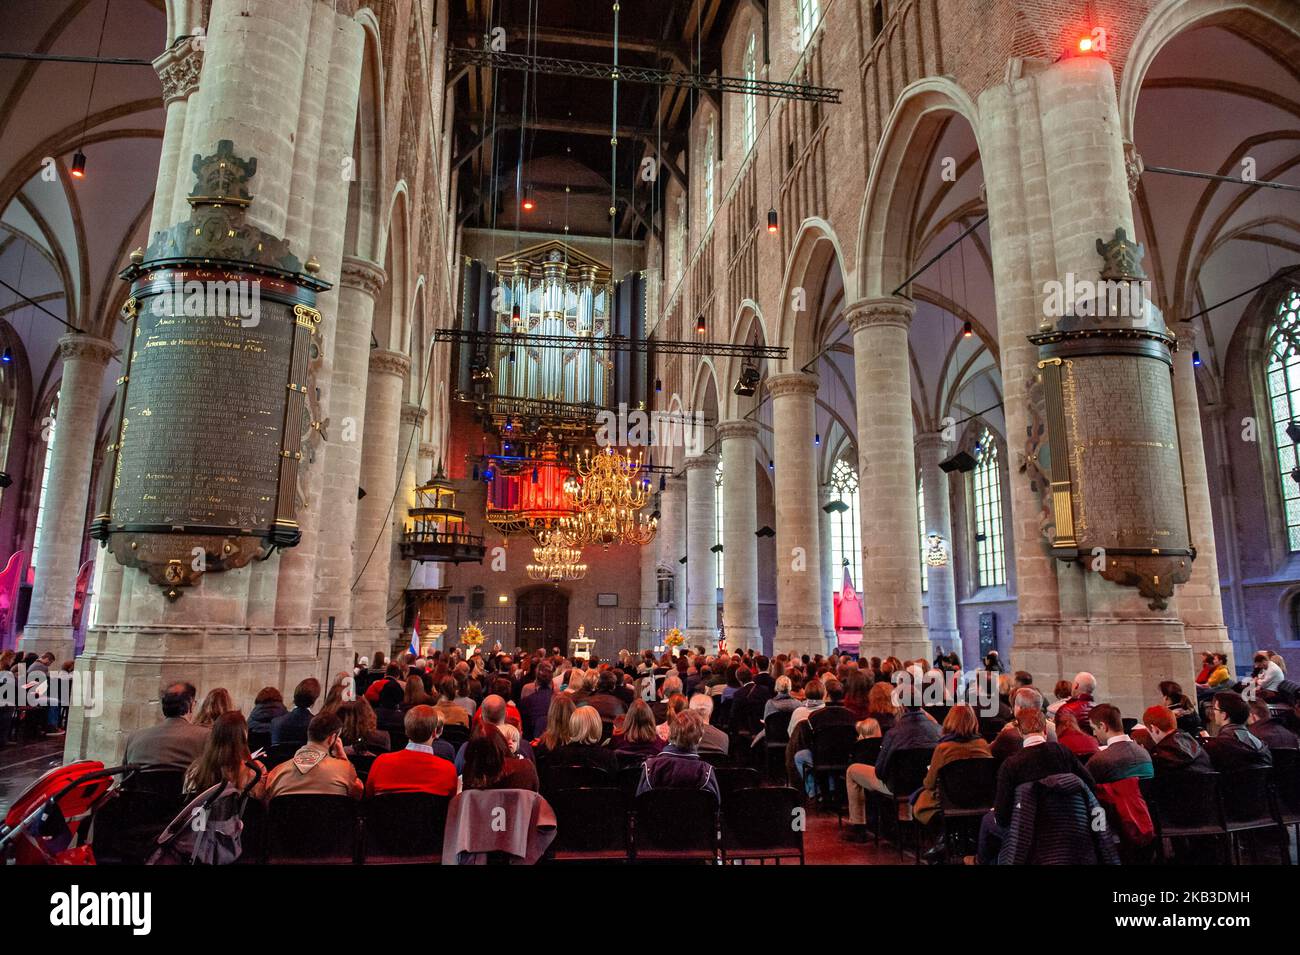 November 22nd, Leiden, The Netherlands. After the pilgrims left England to escape the established Anglican Church, and before they landed on Plymouth Rock, they arrived in Leiden, The Netherlands where they lived for 11 years. Thanksgiving holds a special significance for the Dutch and every year in Leiden, the annual Thanksgiving Day Service at the historic Pieterskerk in Leiden is a celebration of the history of the pilgrims and their connection to Holland. The pilgrims recorded their births, marriages and deaths in the Pieterskerk, and lived in the surrounding neighborhoods during their tim Stock Photo